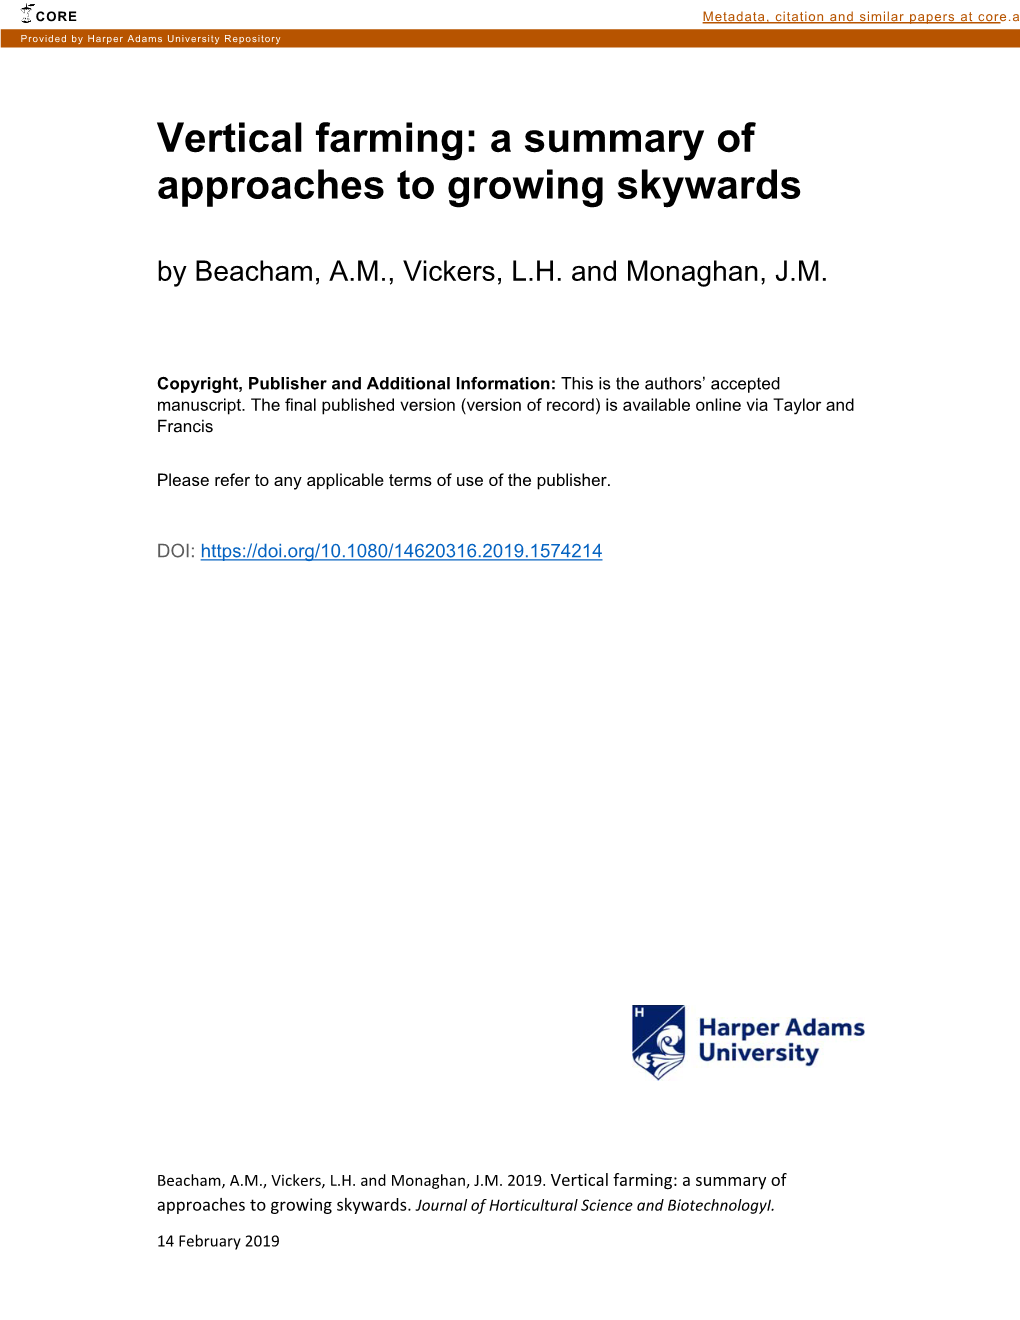 Vertical Farming: a Summary of Approaches to Growing Skywards